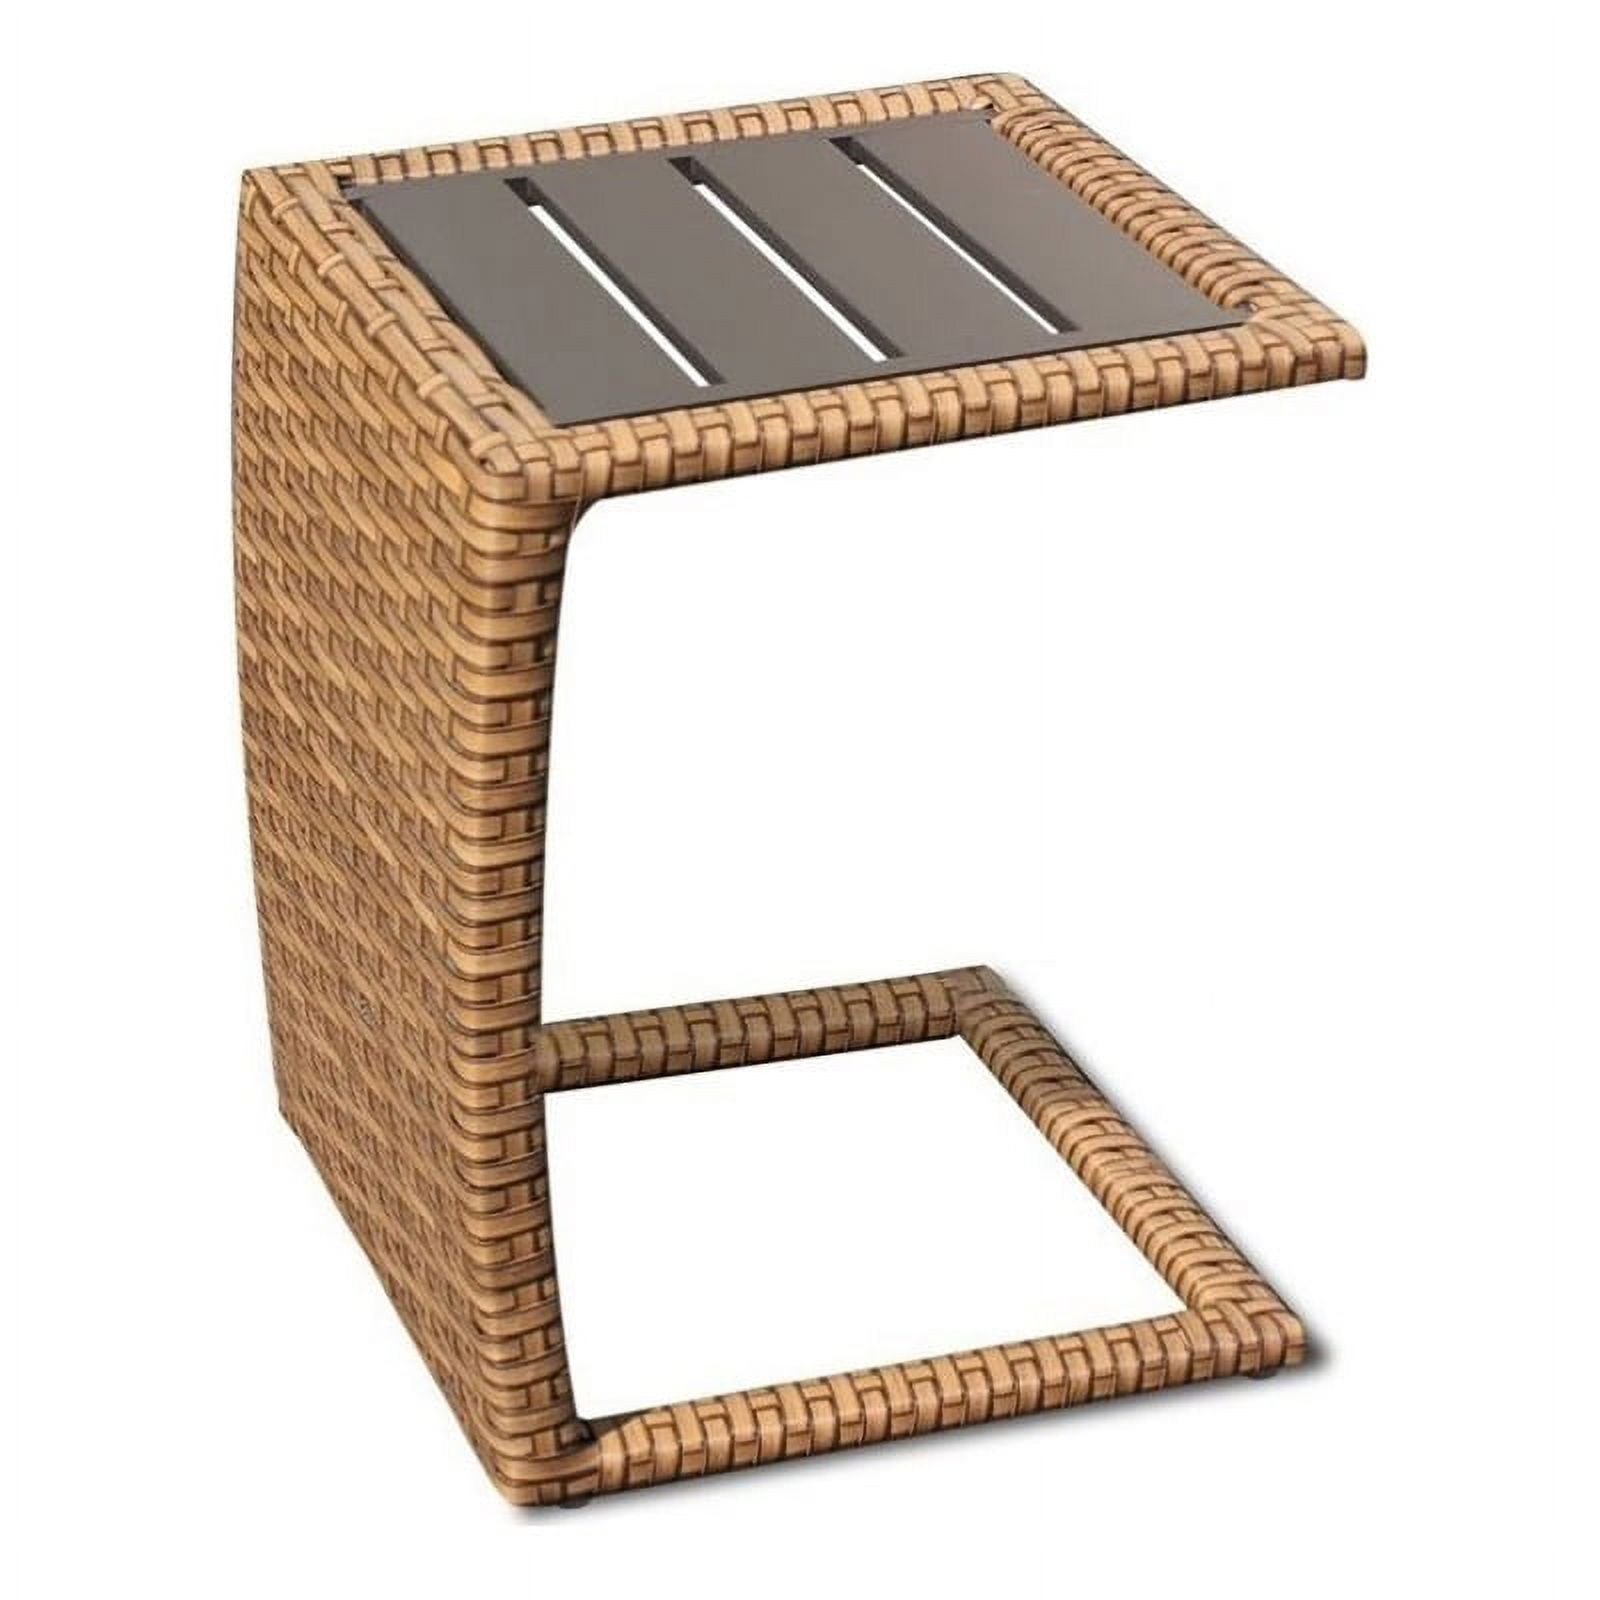 Bowery Hill Transitional Wicker / Rattan Outdoor Side Table in Caramel - image 2 of 3